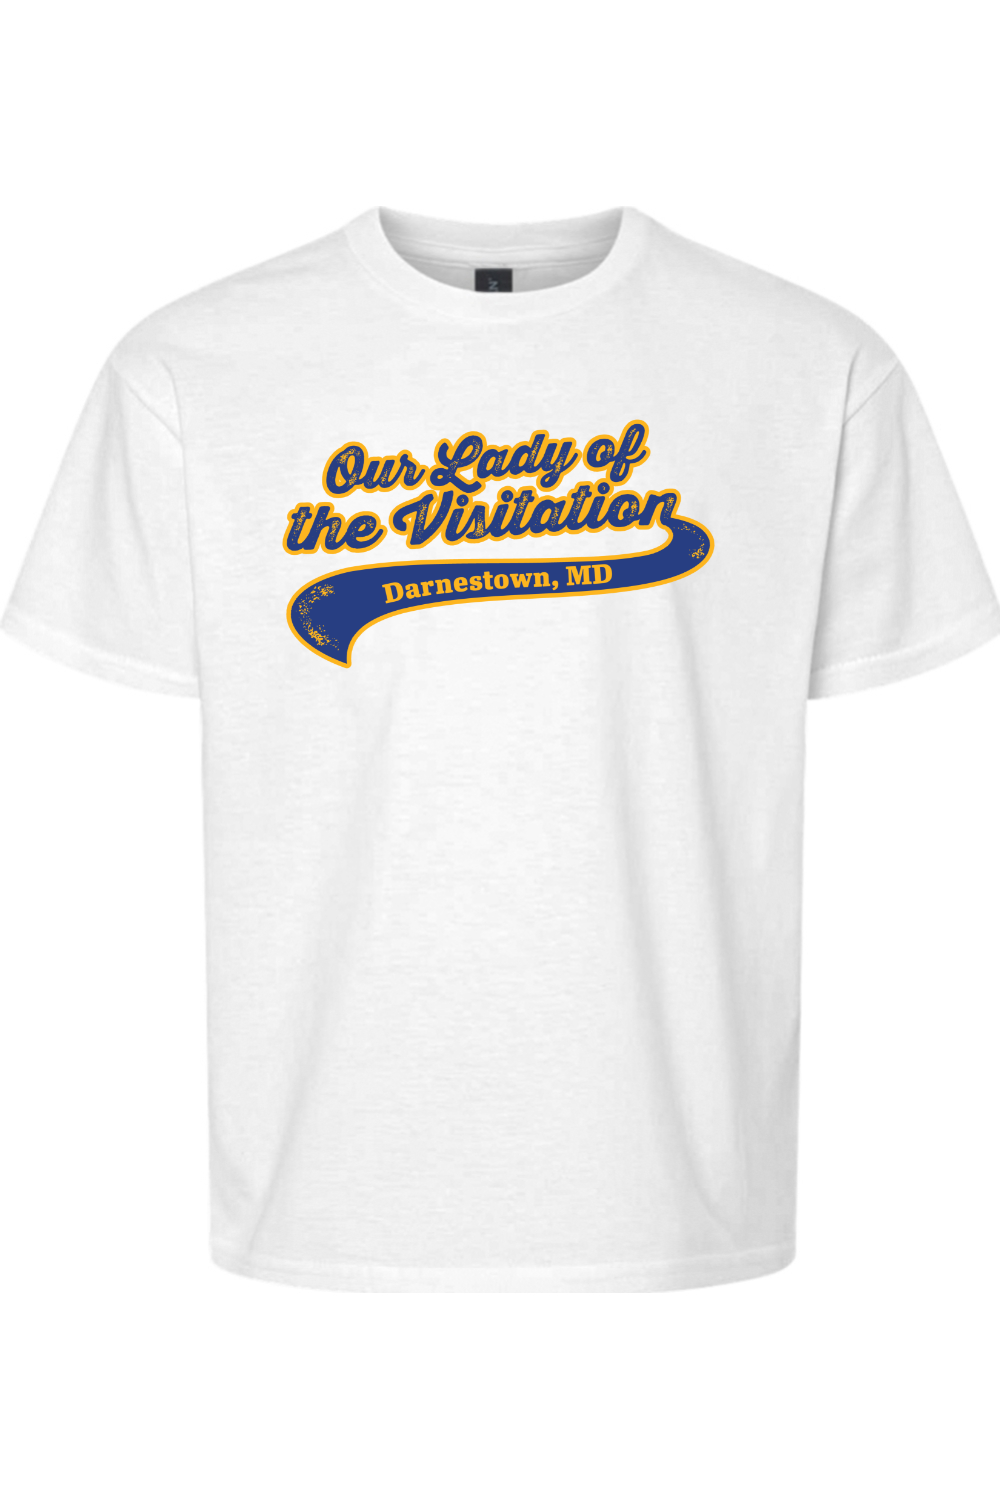 Our Lady of the Visitation Retro Youth T-Shirt